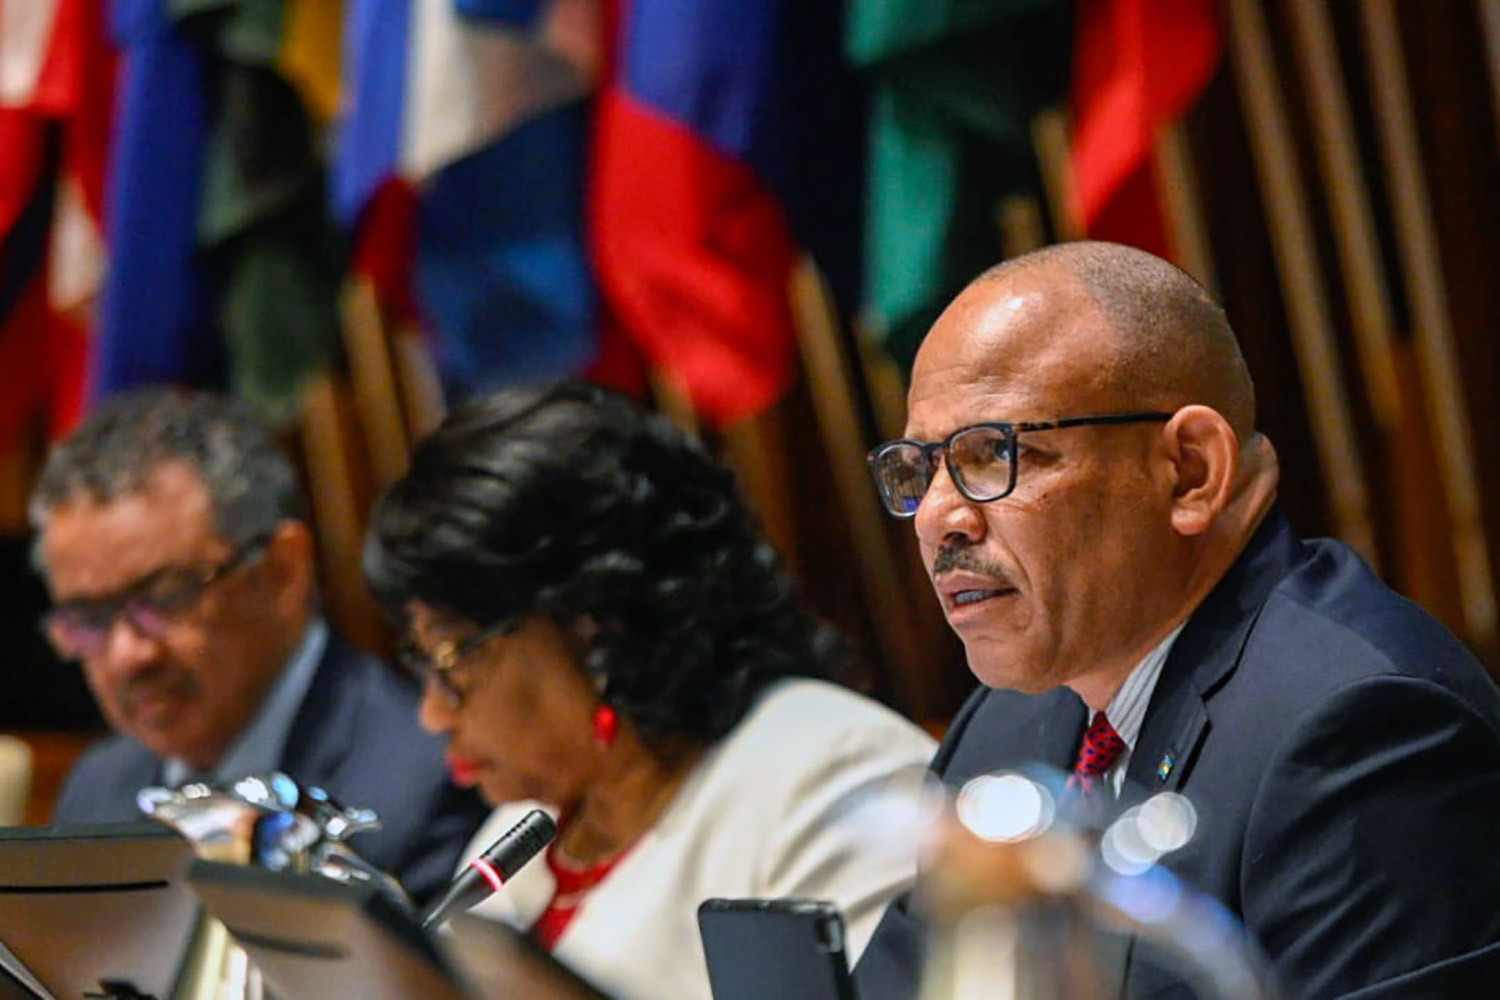 Bahamas Health Minister Duane Ermest Lascelles Sands, during the opening ceremony of PAHO's 57th Directing Council.